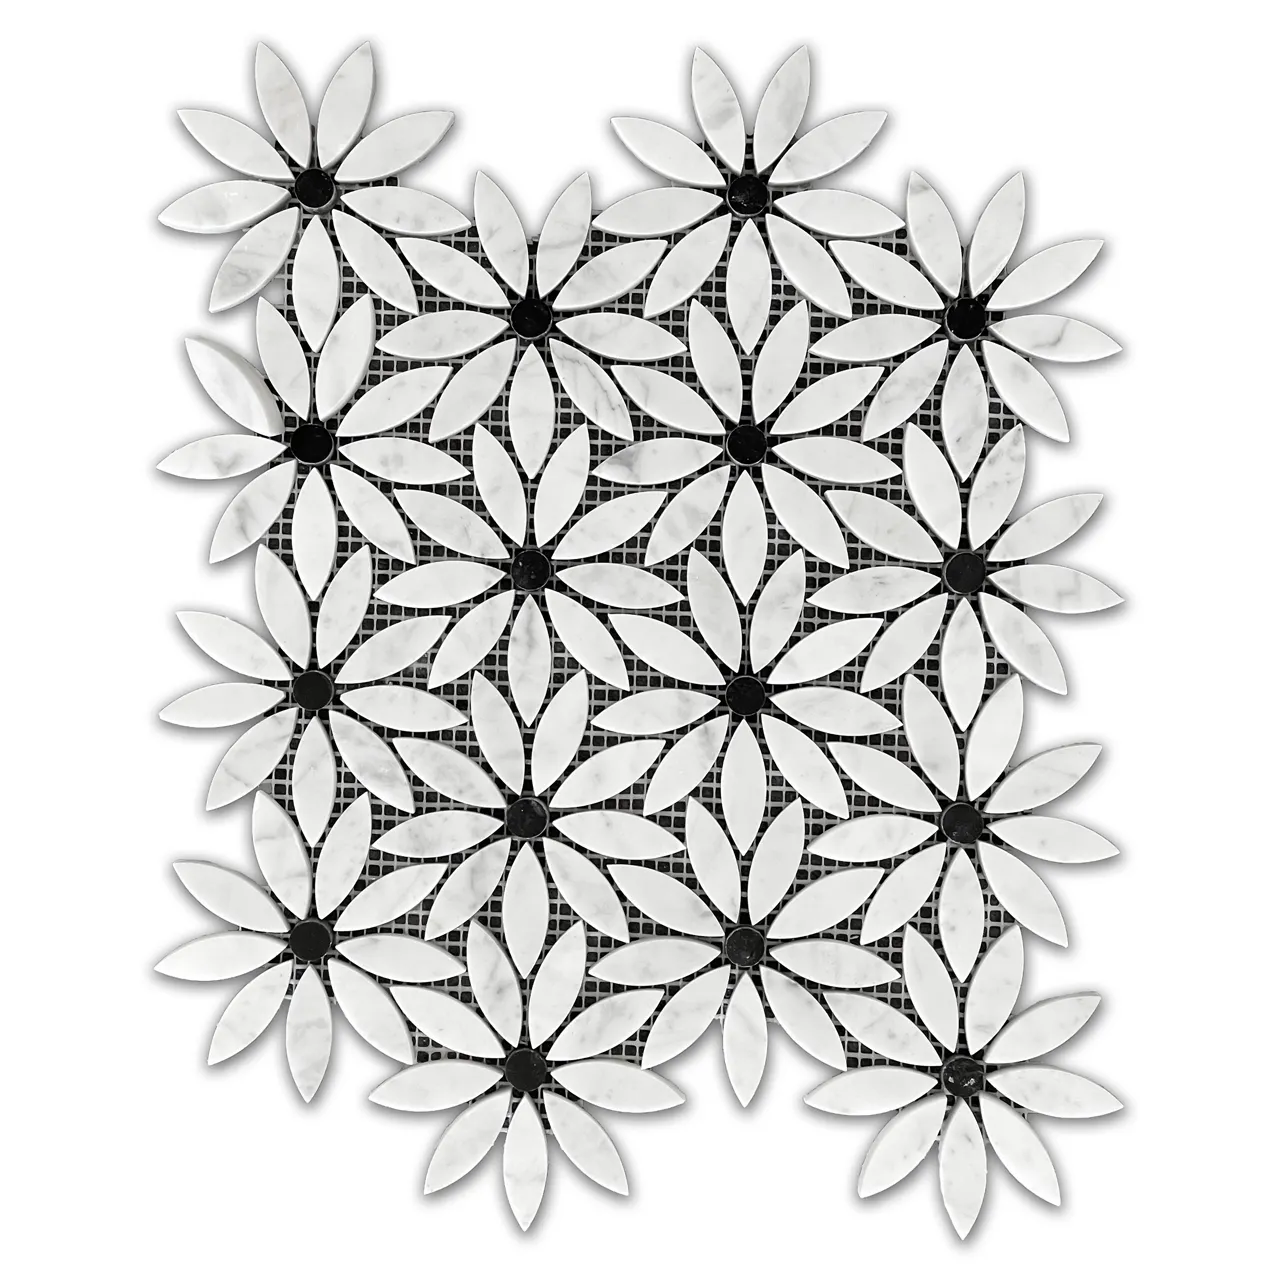 Carrara White Marble With Nero Marquina Black Accent Daisy Flower Waterjet Mosaic Tile Polished